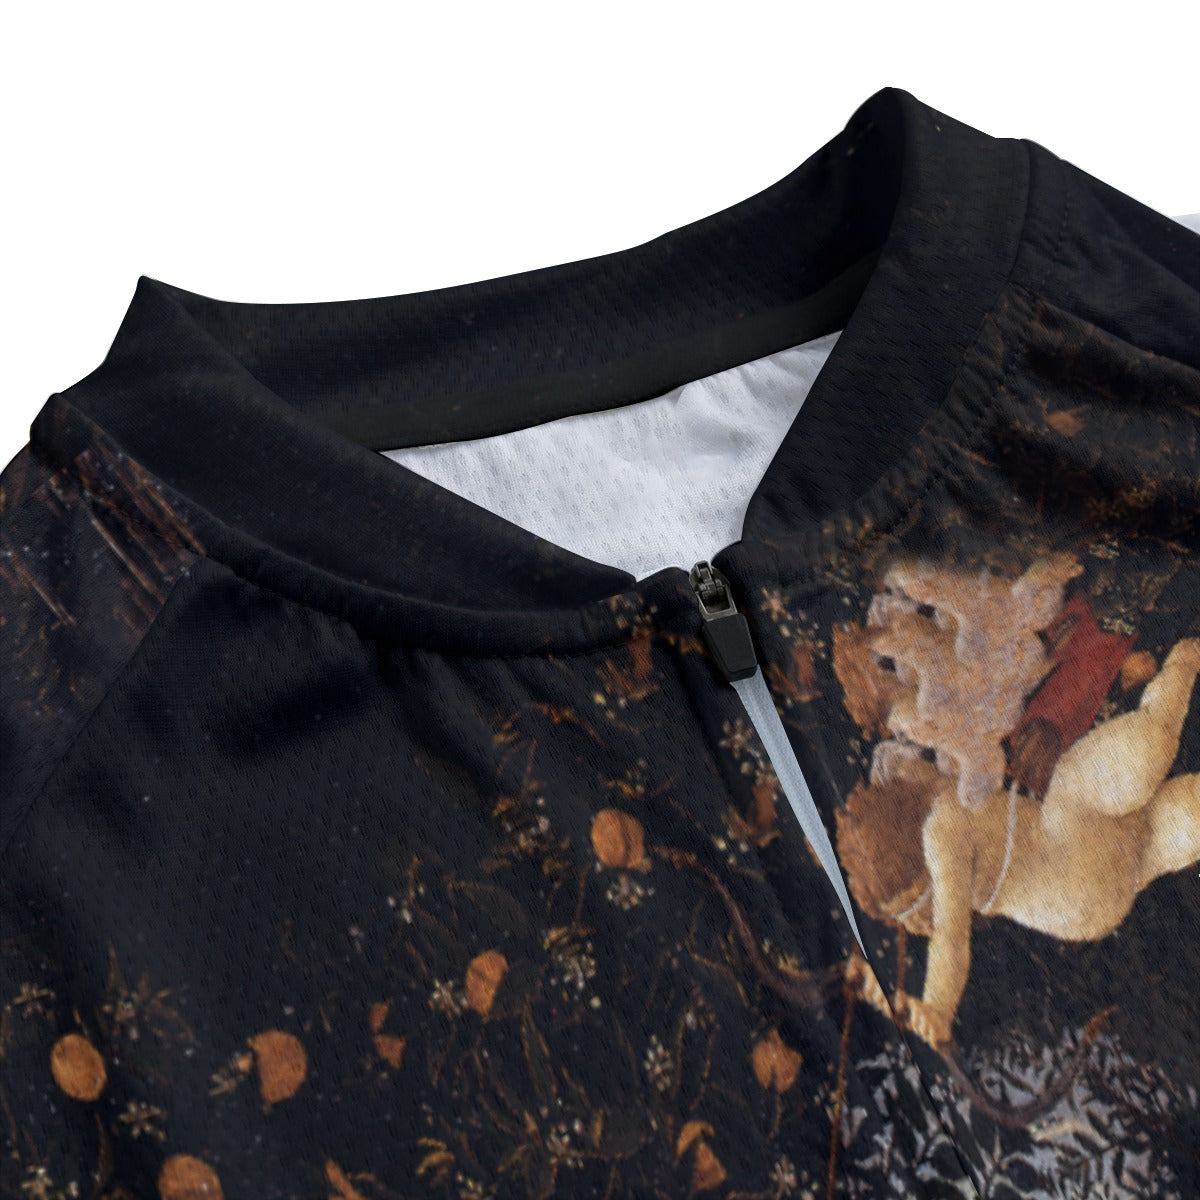 Women's cycling top with floral print